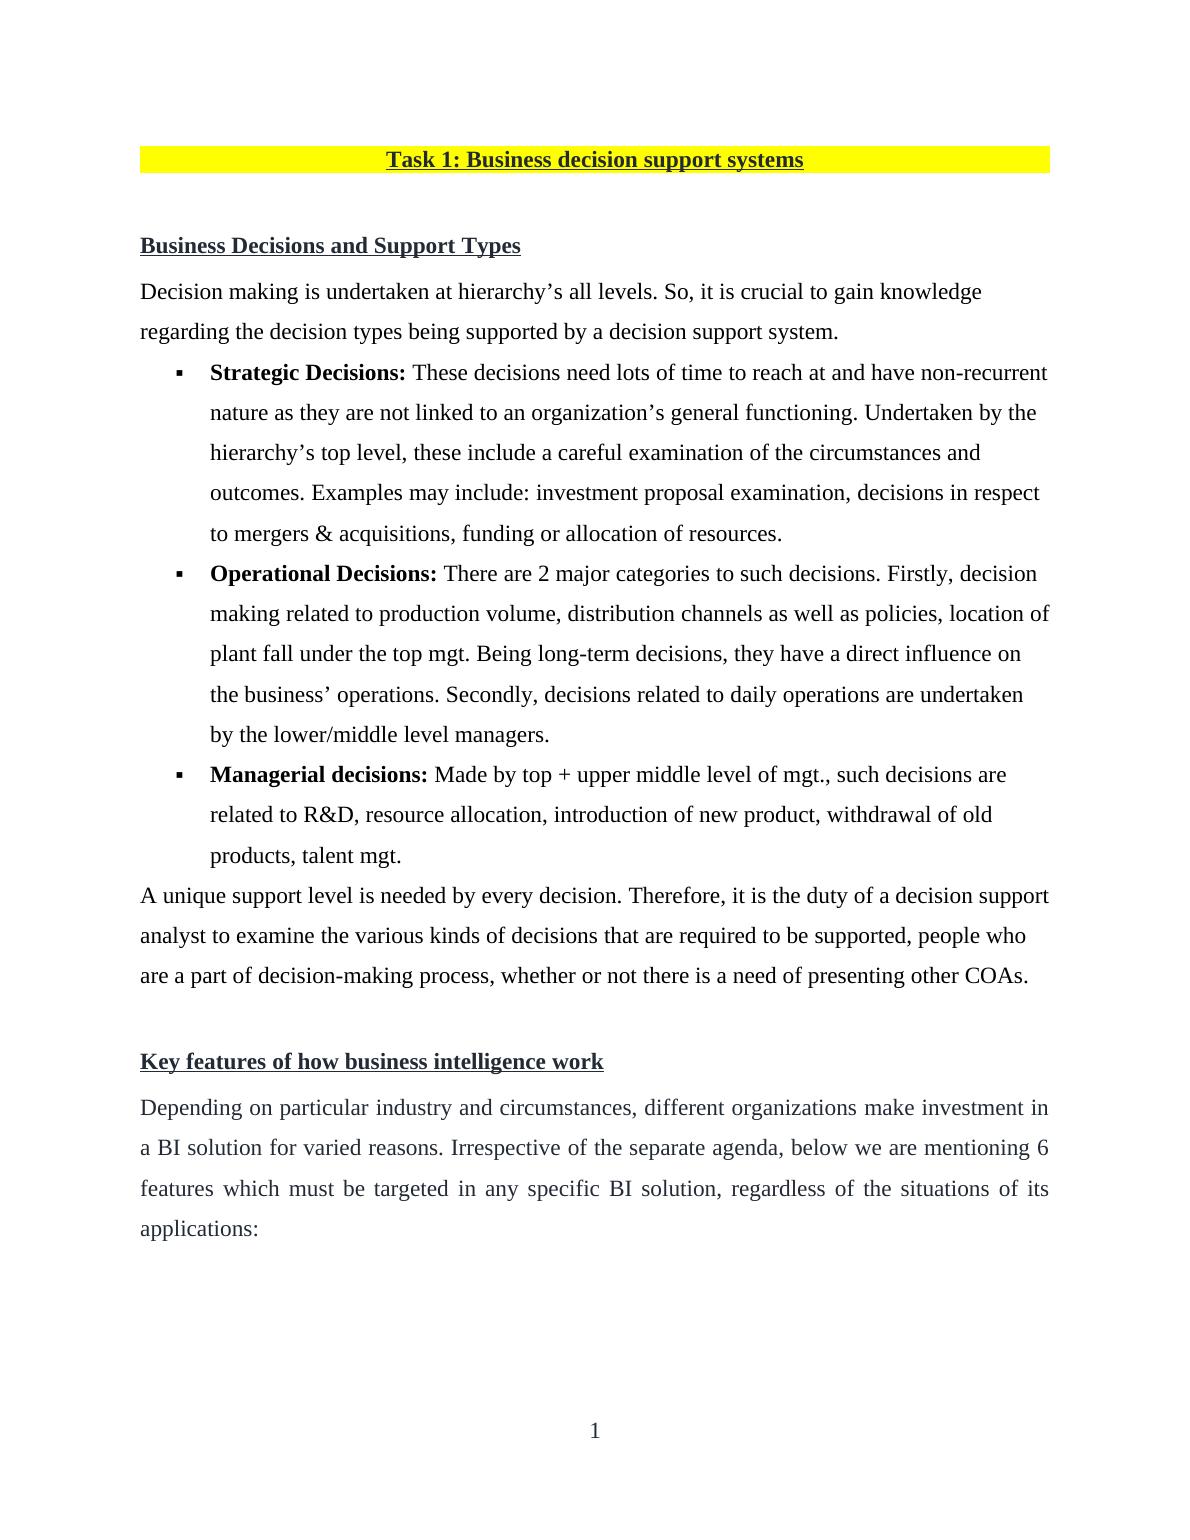 Business decision support systems_1